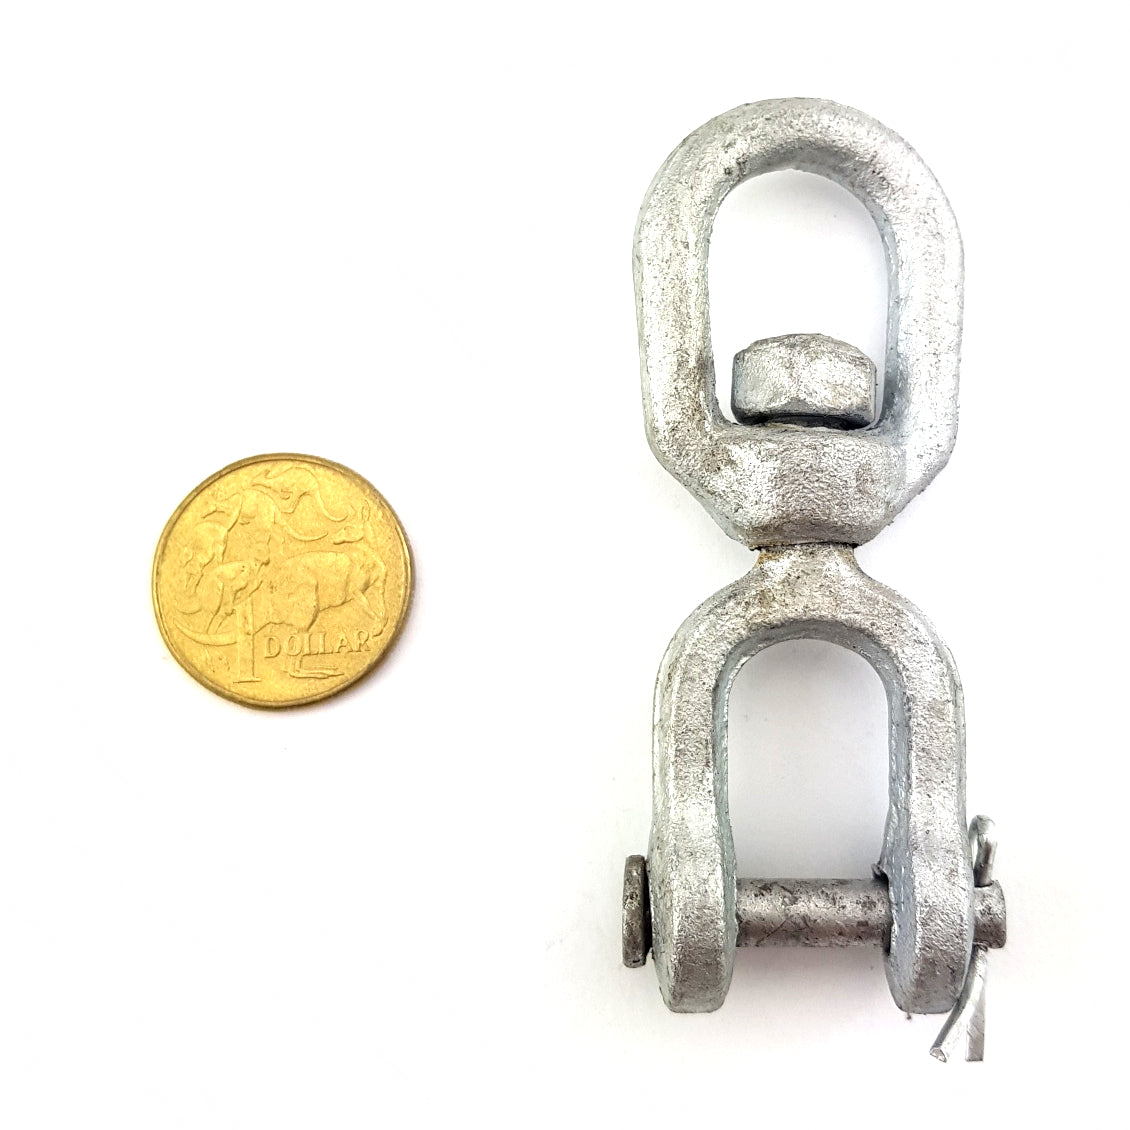 Galvanised chain swivel with a linchpin opening, size 6mm. Melbourne Australia